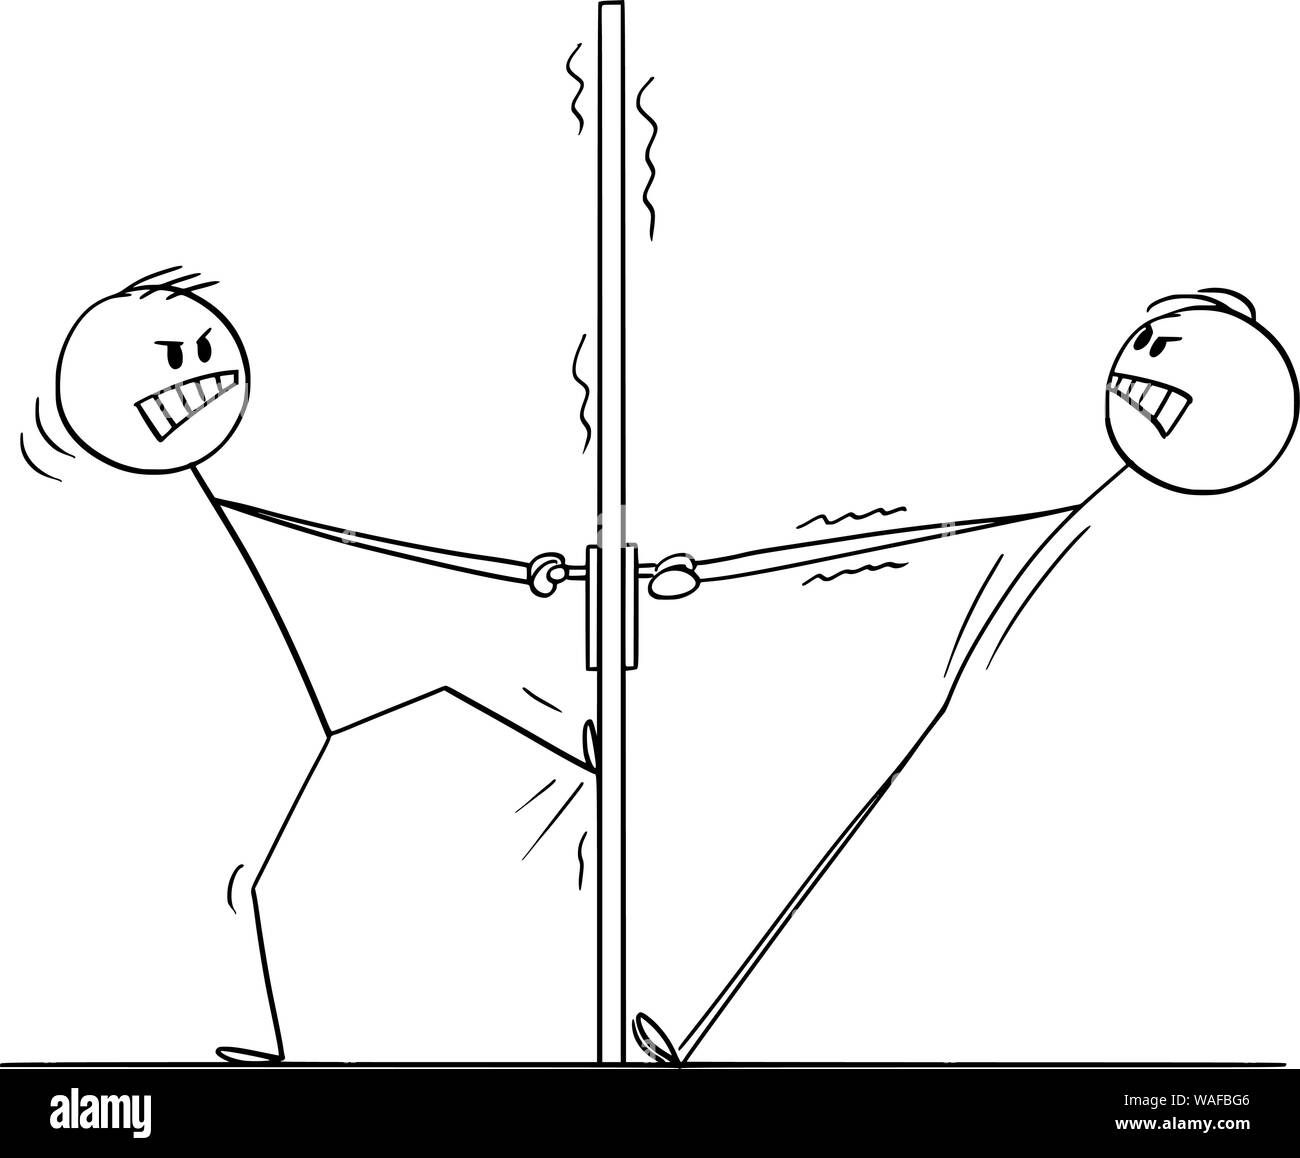 Vector cartoon stick figure drawing conceptual illustration of two angry men or businessmen trying to open the door from both sides and not cooperating. Stock Vector